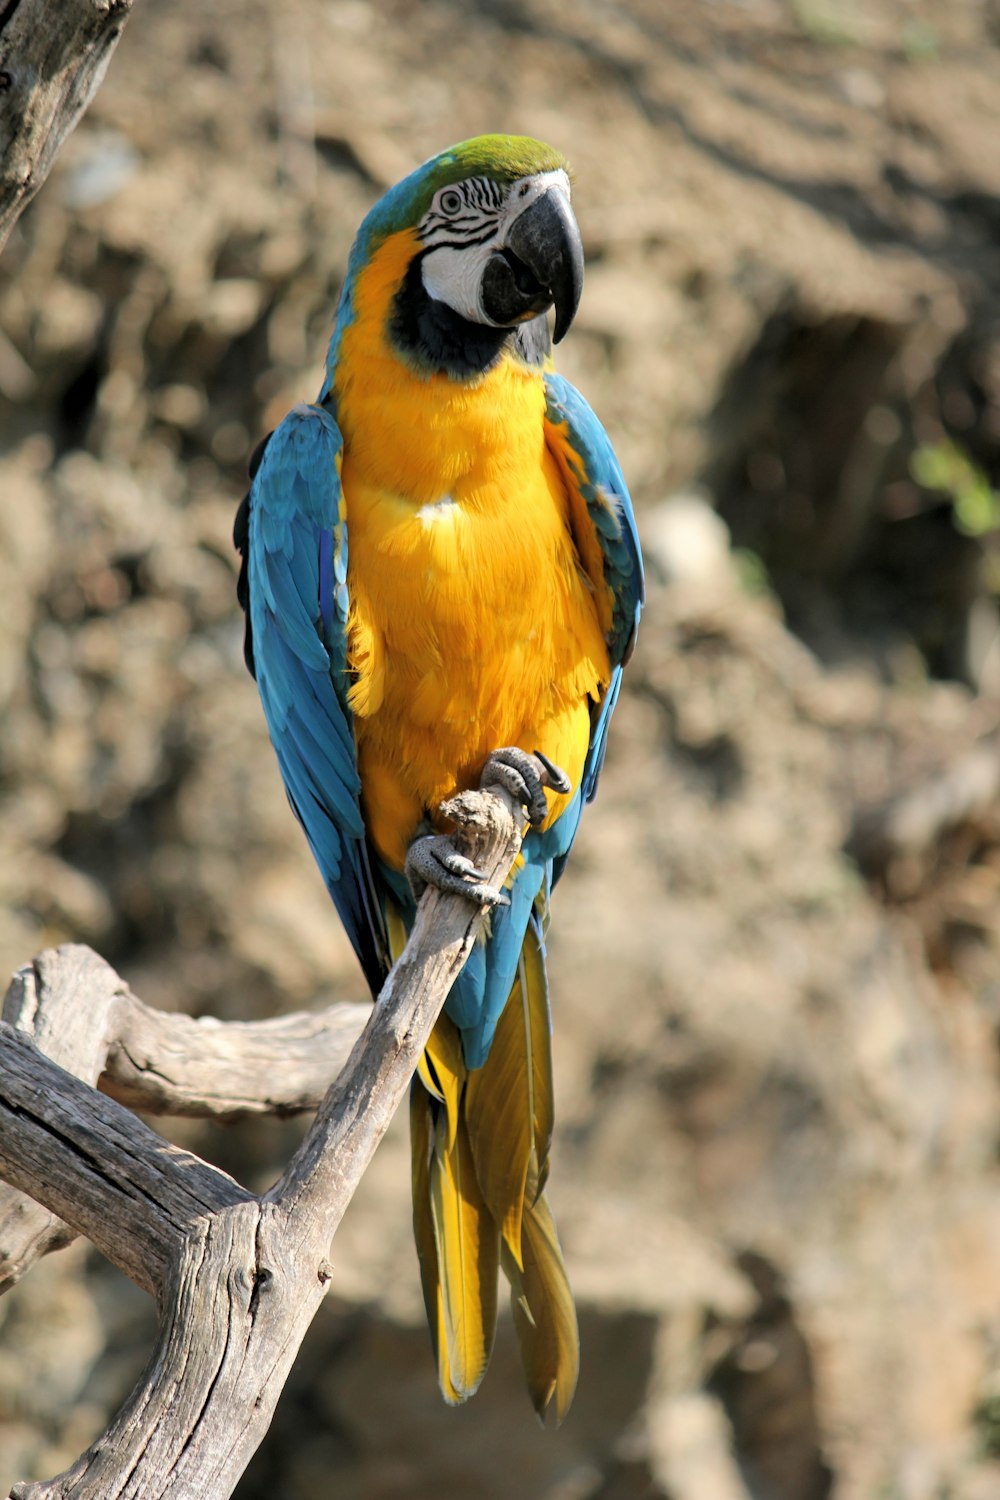 blue-and-yellow parrot perched on tree during daytime